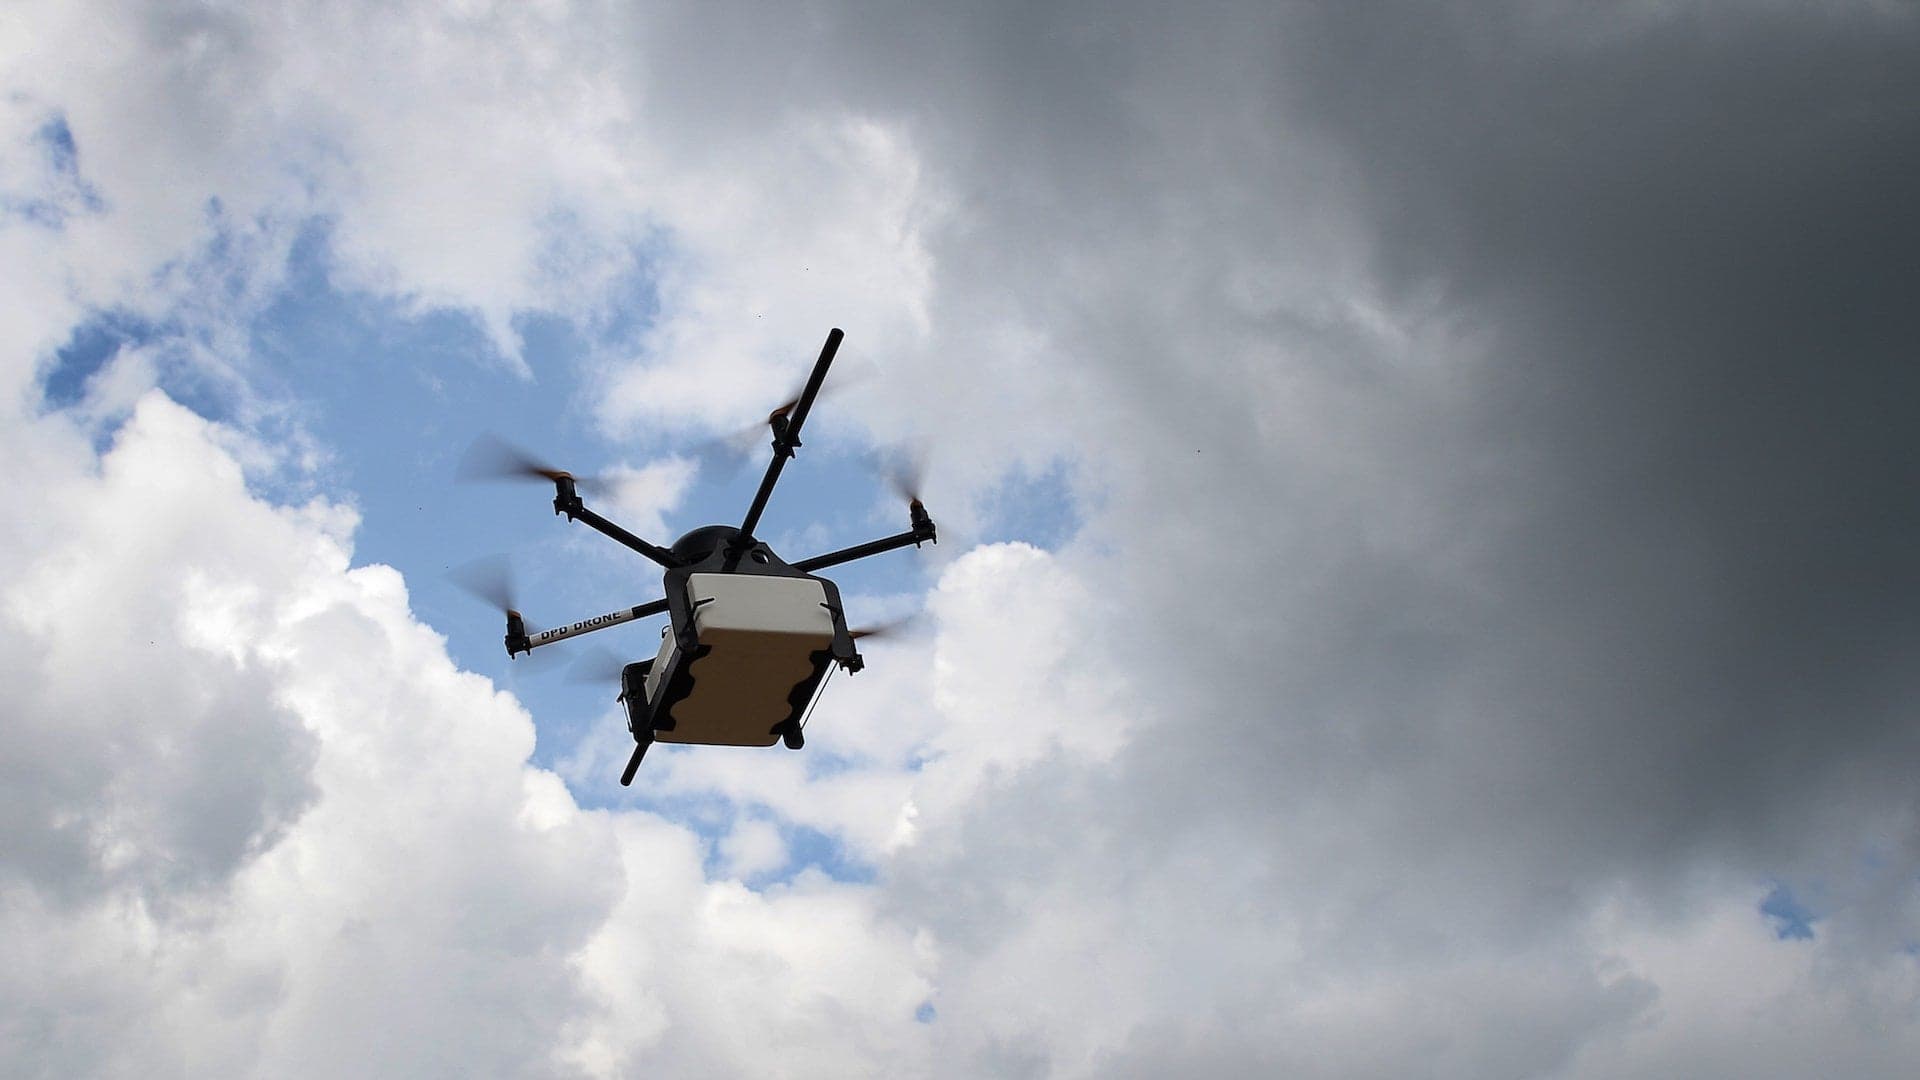 North Carolina Awaits Approval for Medical Supply Drone Deliveries